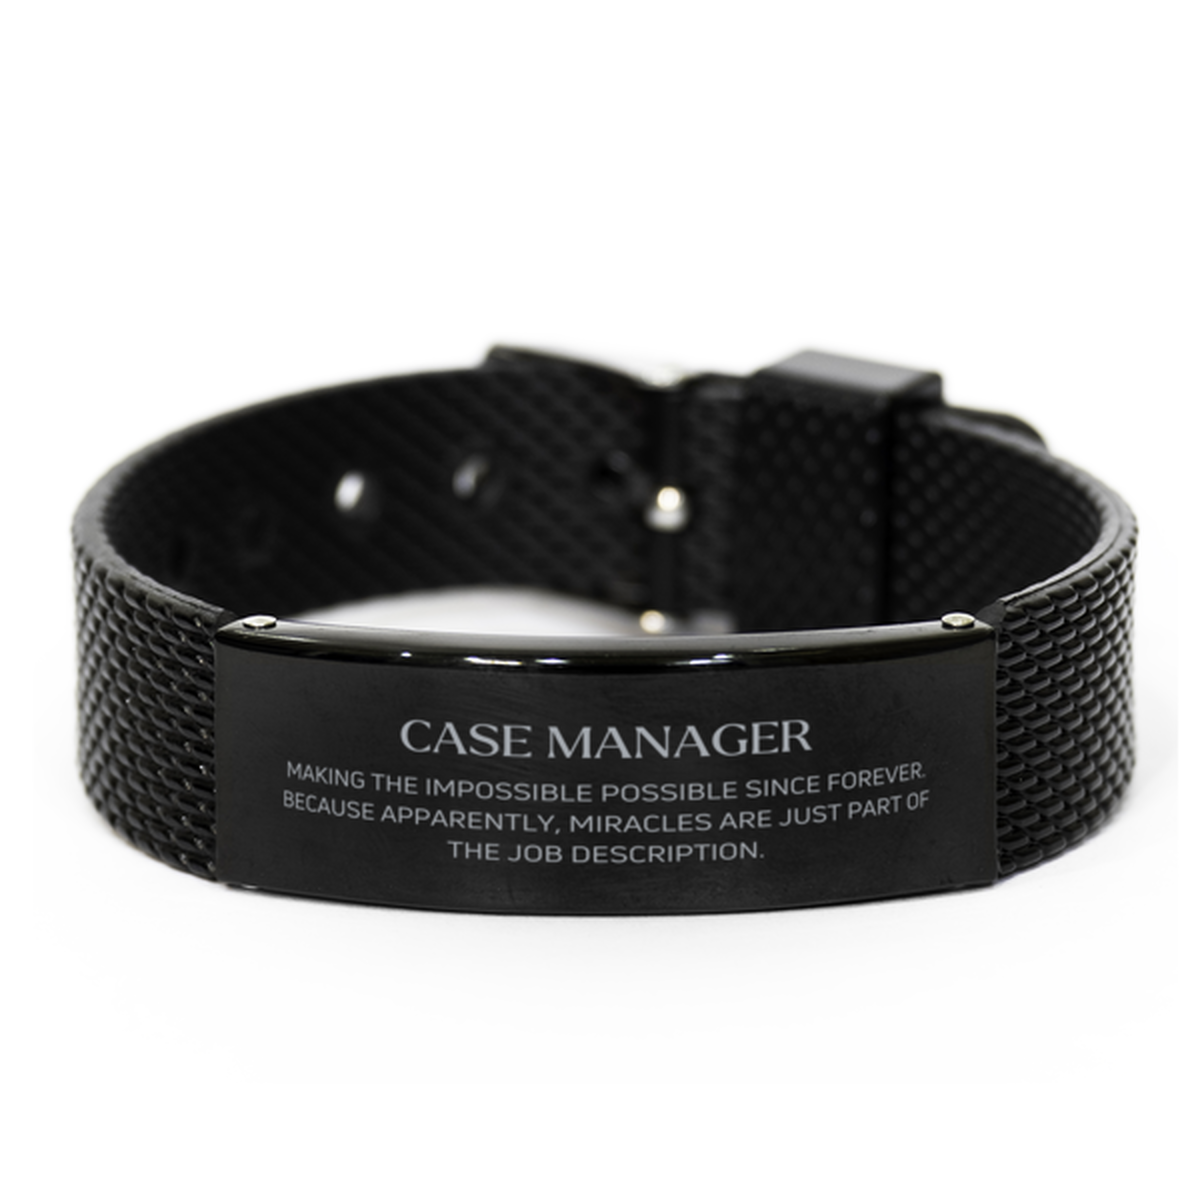 Funny Case Manager Gifts, Miracles are just part of the job description, Inspirational Birthday Black Shark Mesh Bracelet For Case Manager, Men, Women, Coworkers, Friends, Boss